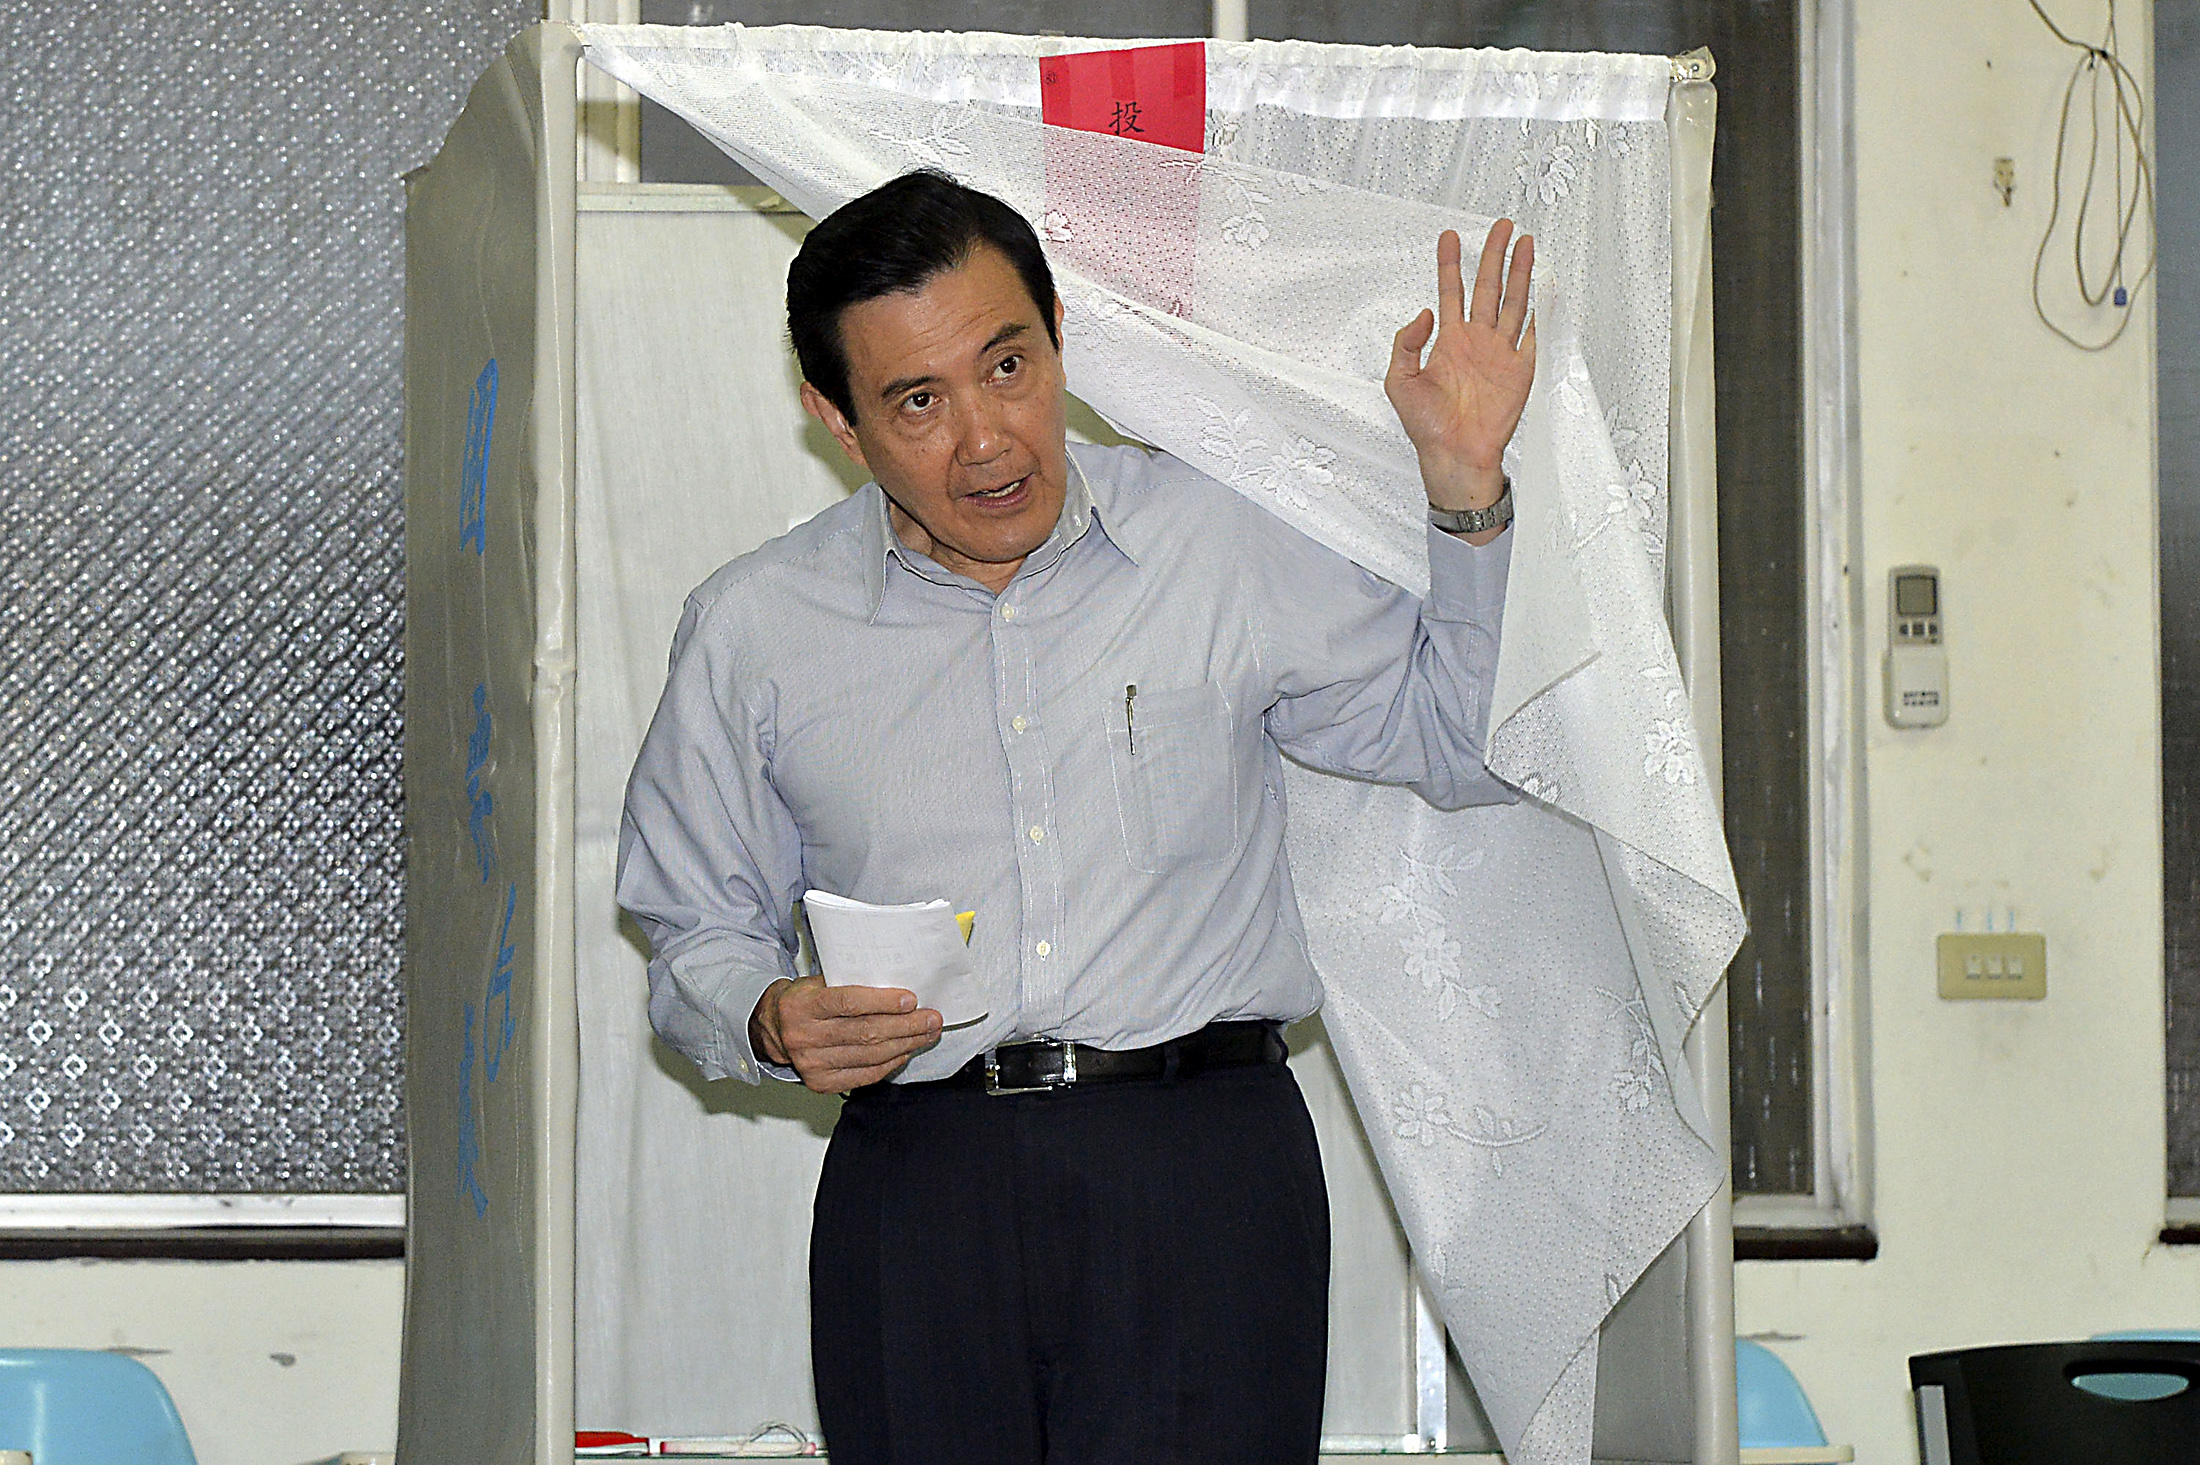 Taiwan's President Ma Ying-jeou walks out of a voting booth at a polling station in Taipei during local elections on Nov. 29, 2014 (Frank Sun—Reuters)